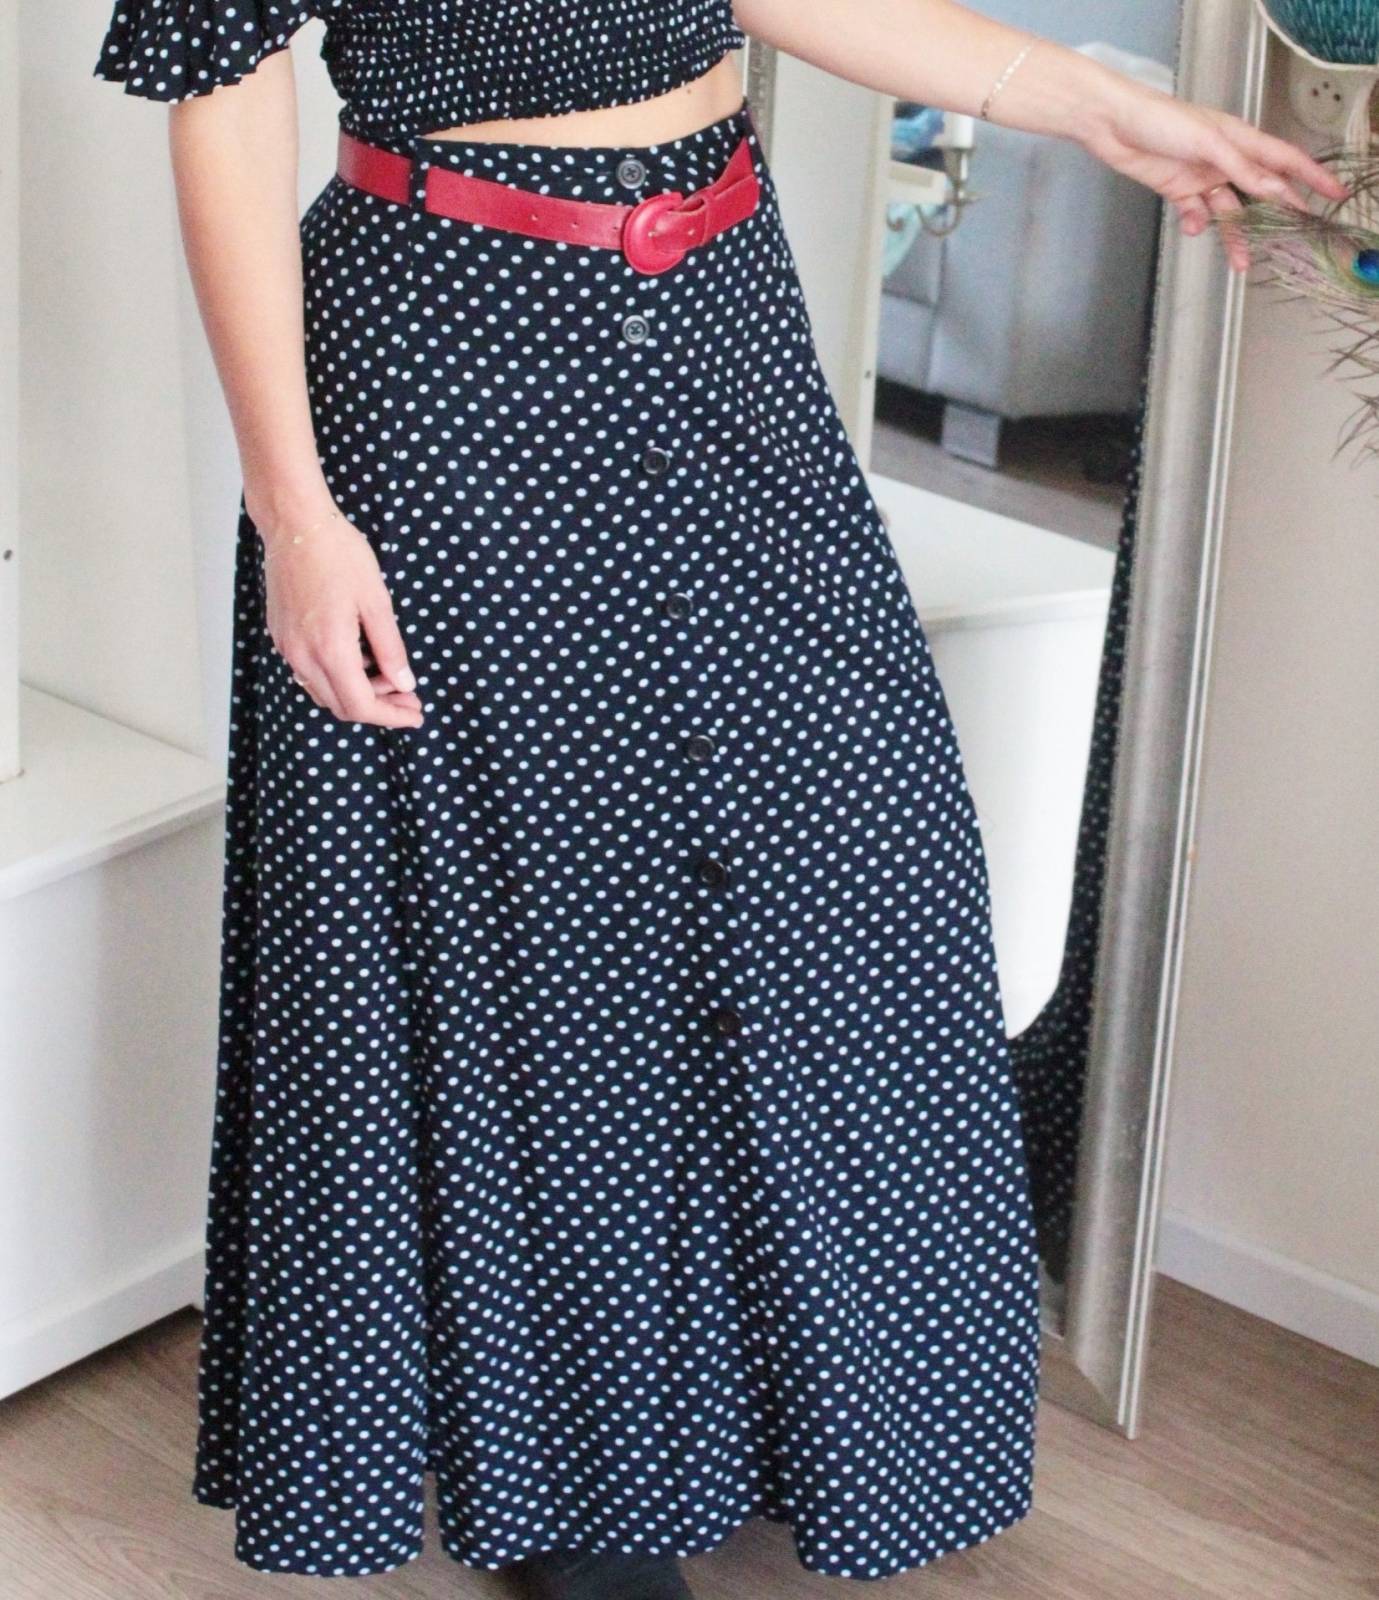 Black Polka Dot maxi skirt - summer skirt with dots and buttons